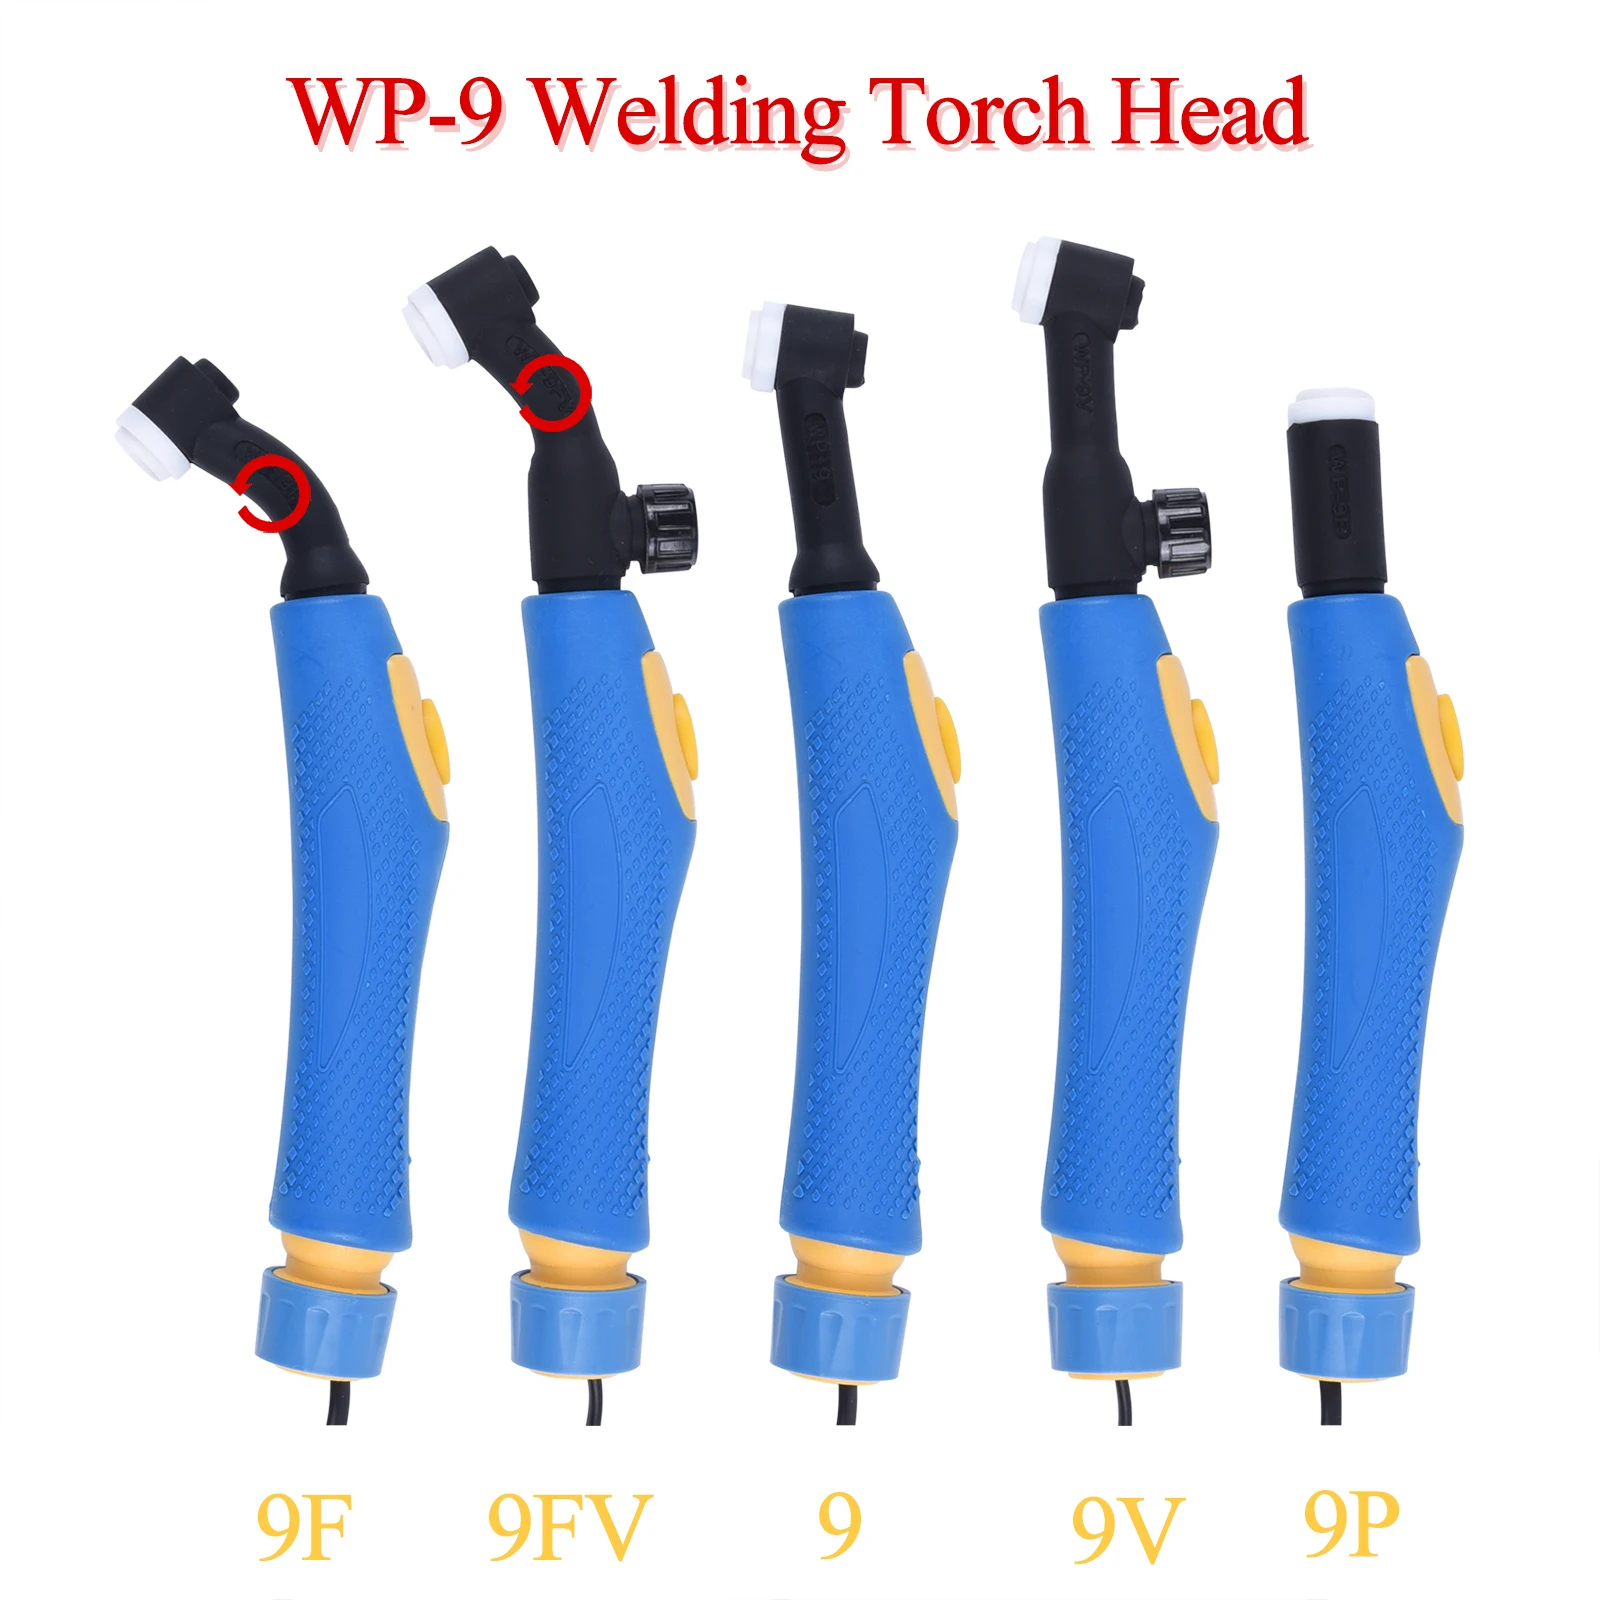 WP9 WP 9F 9F 9V 9FV 9P SR9 SR9F SR9V SR9FV SR9P TIG Torch Body Air Cooled Head Human Engineering Design Rotatable 125 AMP